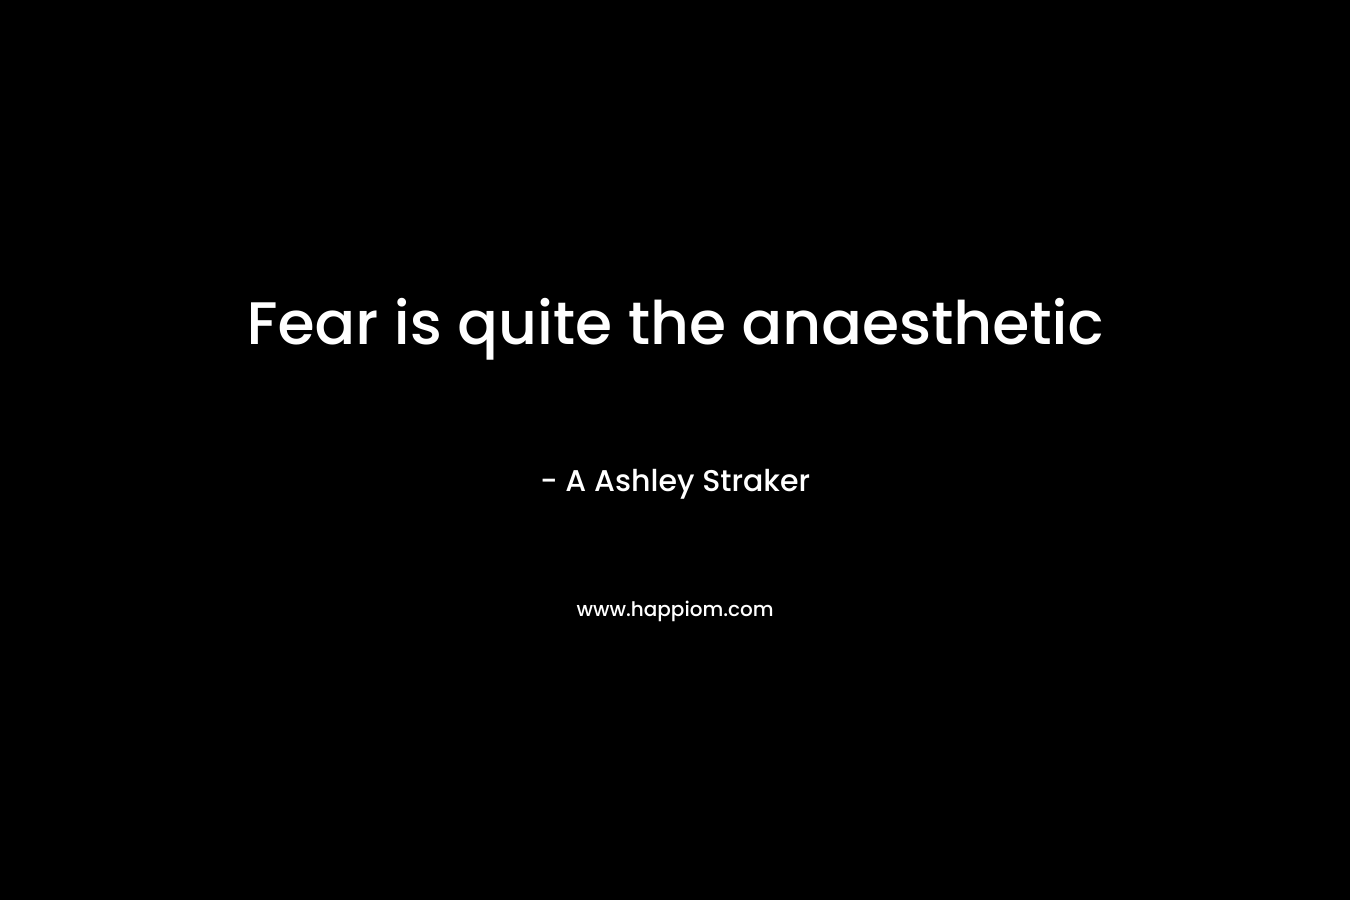 Fear is quite the anaesthetic